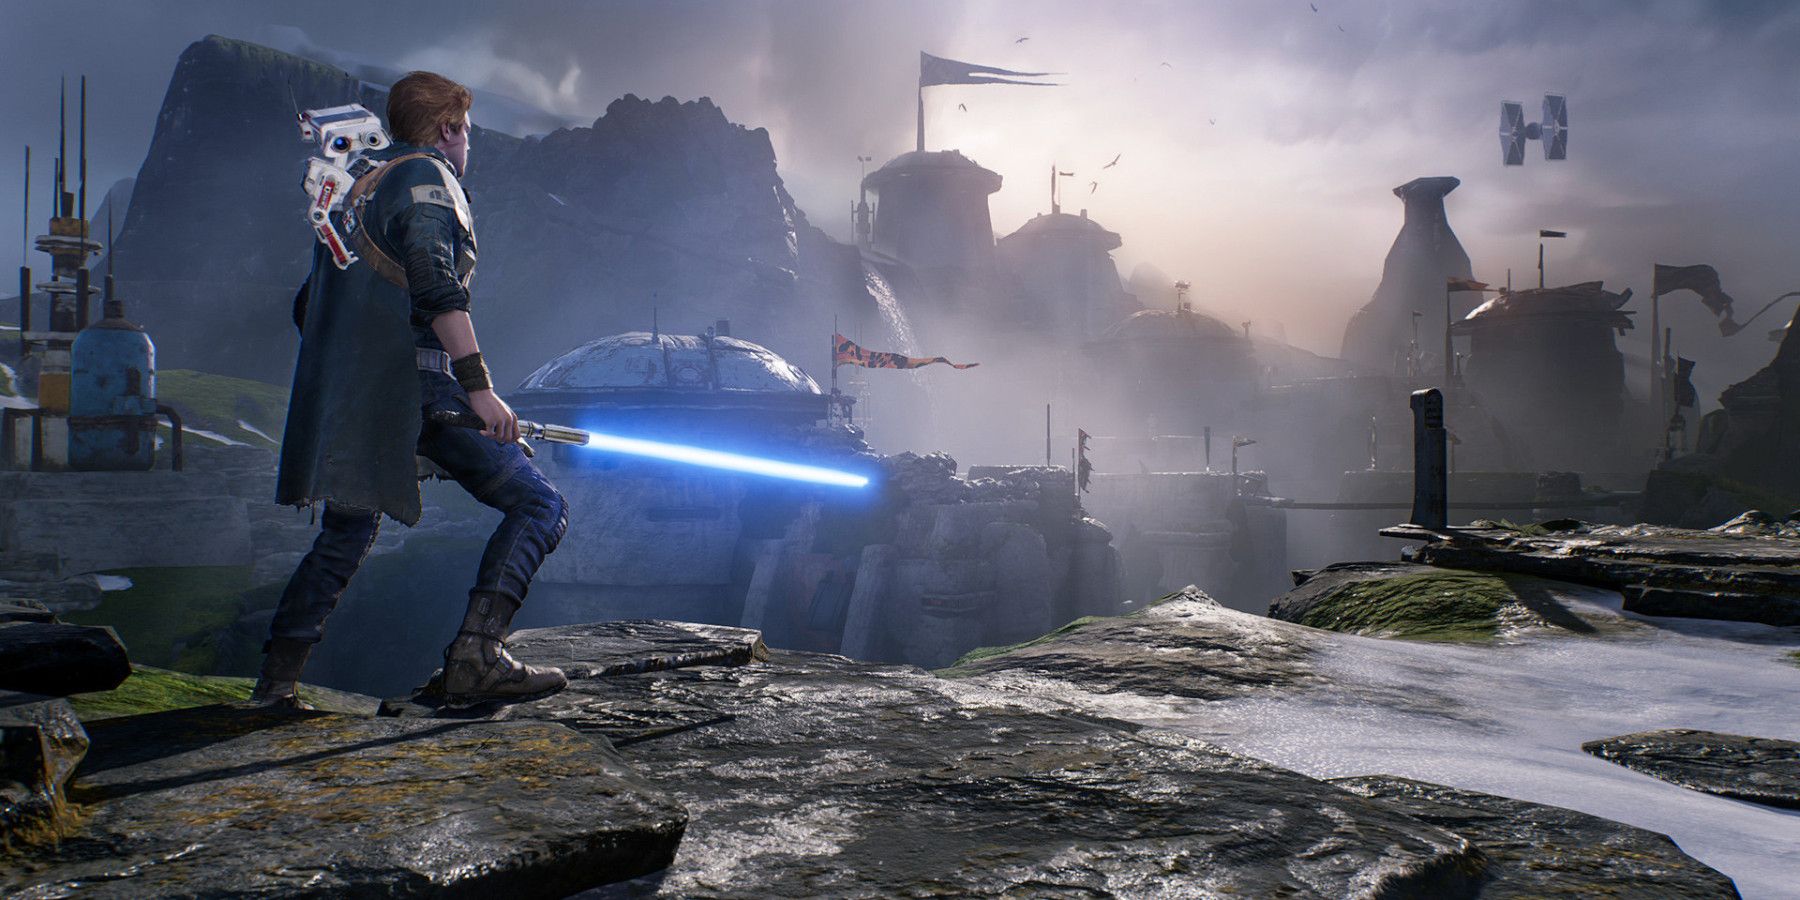 star-wars-jedi-fallen-order-cal-kestis-looking-out-at-planet-deluxe-edition-box-art